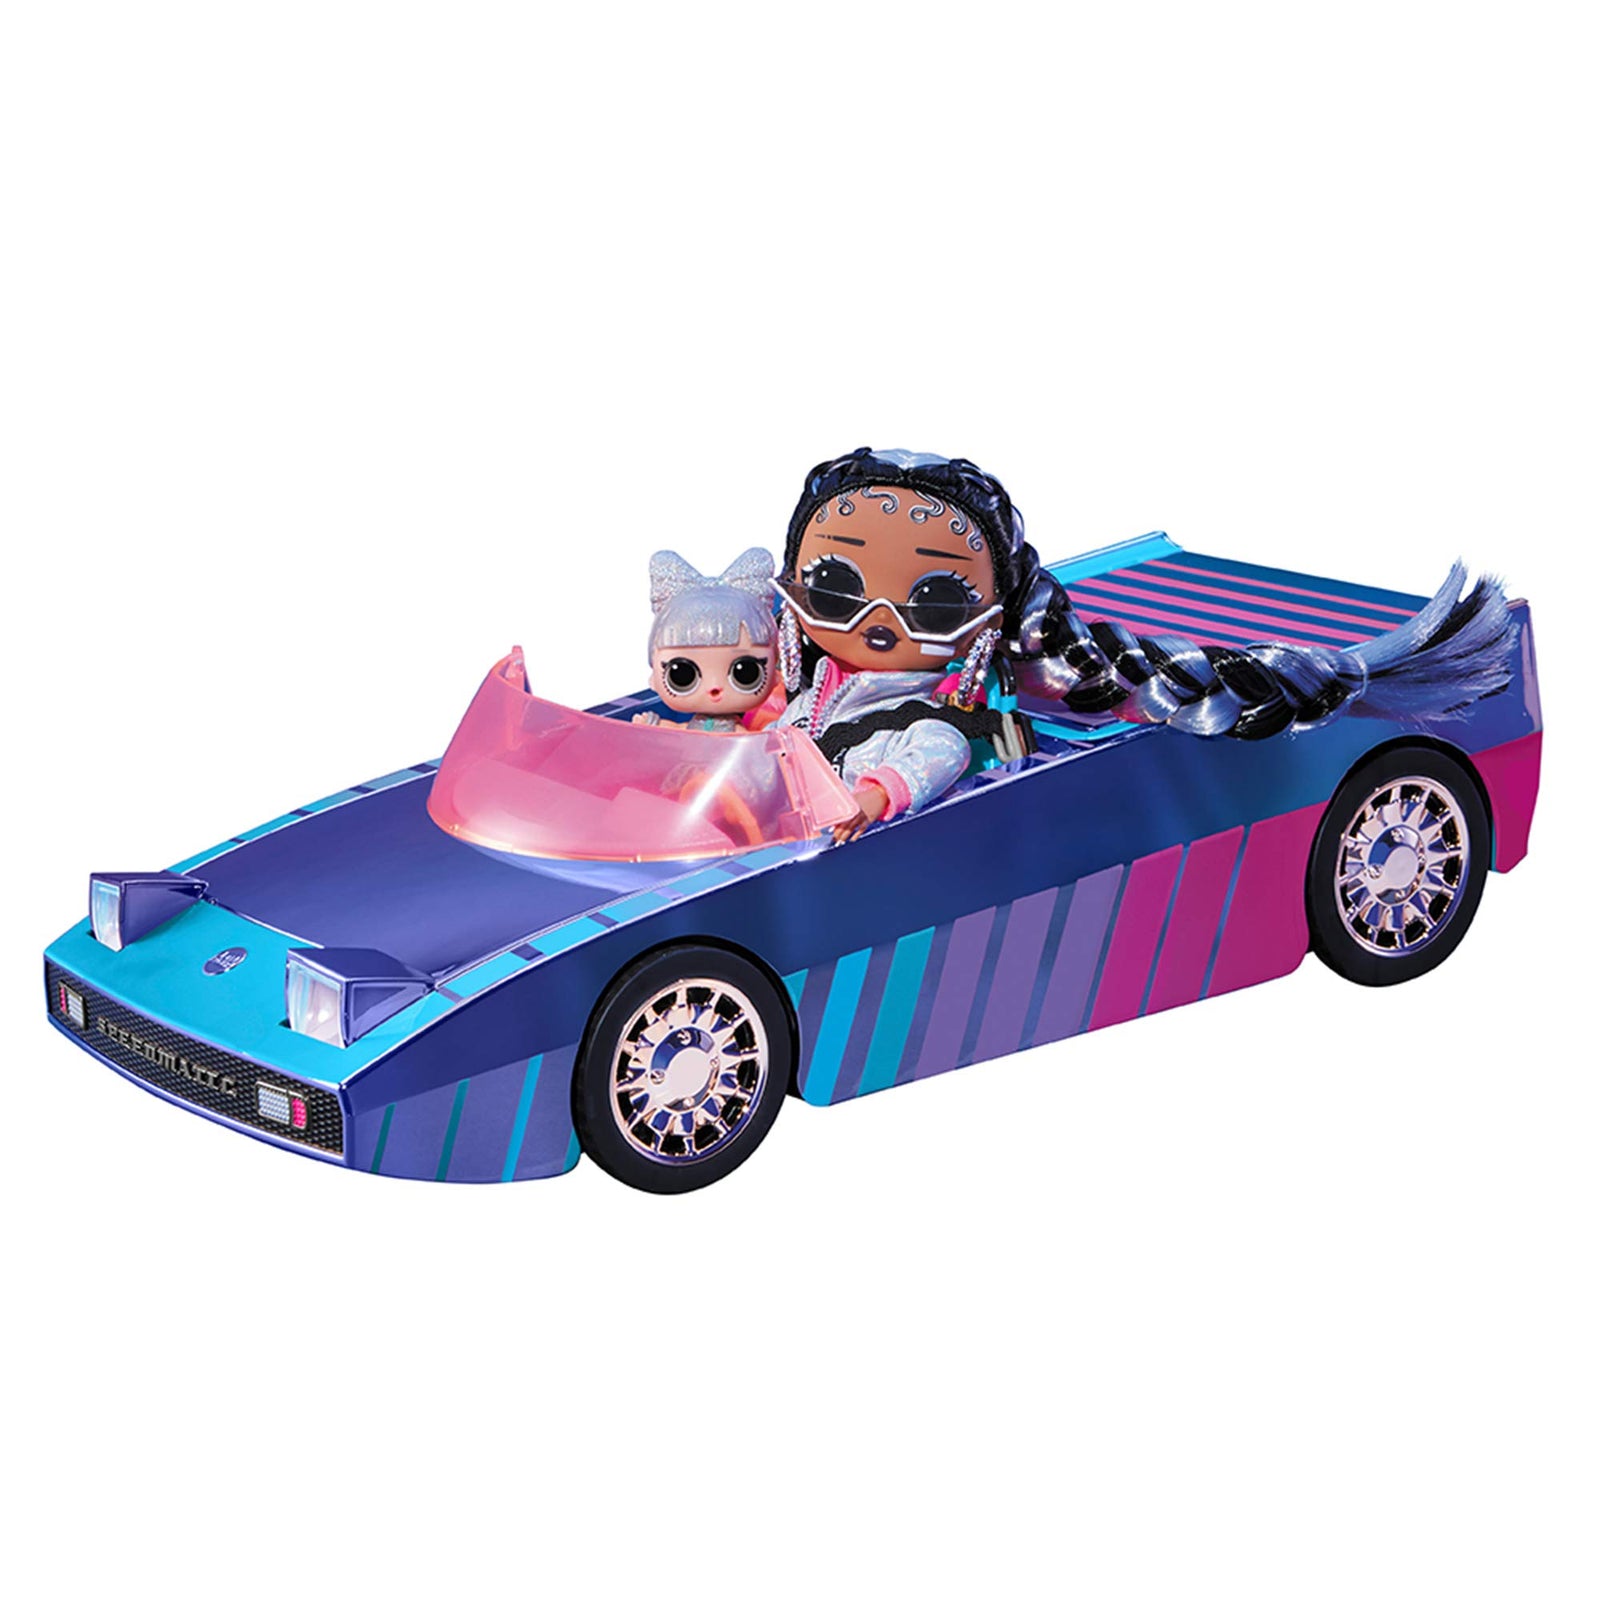 LOL Surprise Dance Machine Car with Exclusive Doll, Surprise Pool and Dance Floor, Multicolor and Magic Blacklight, for Kids